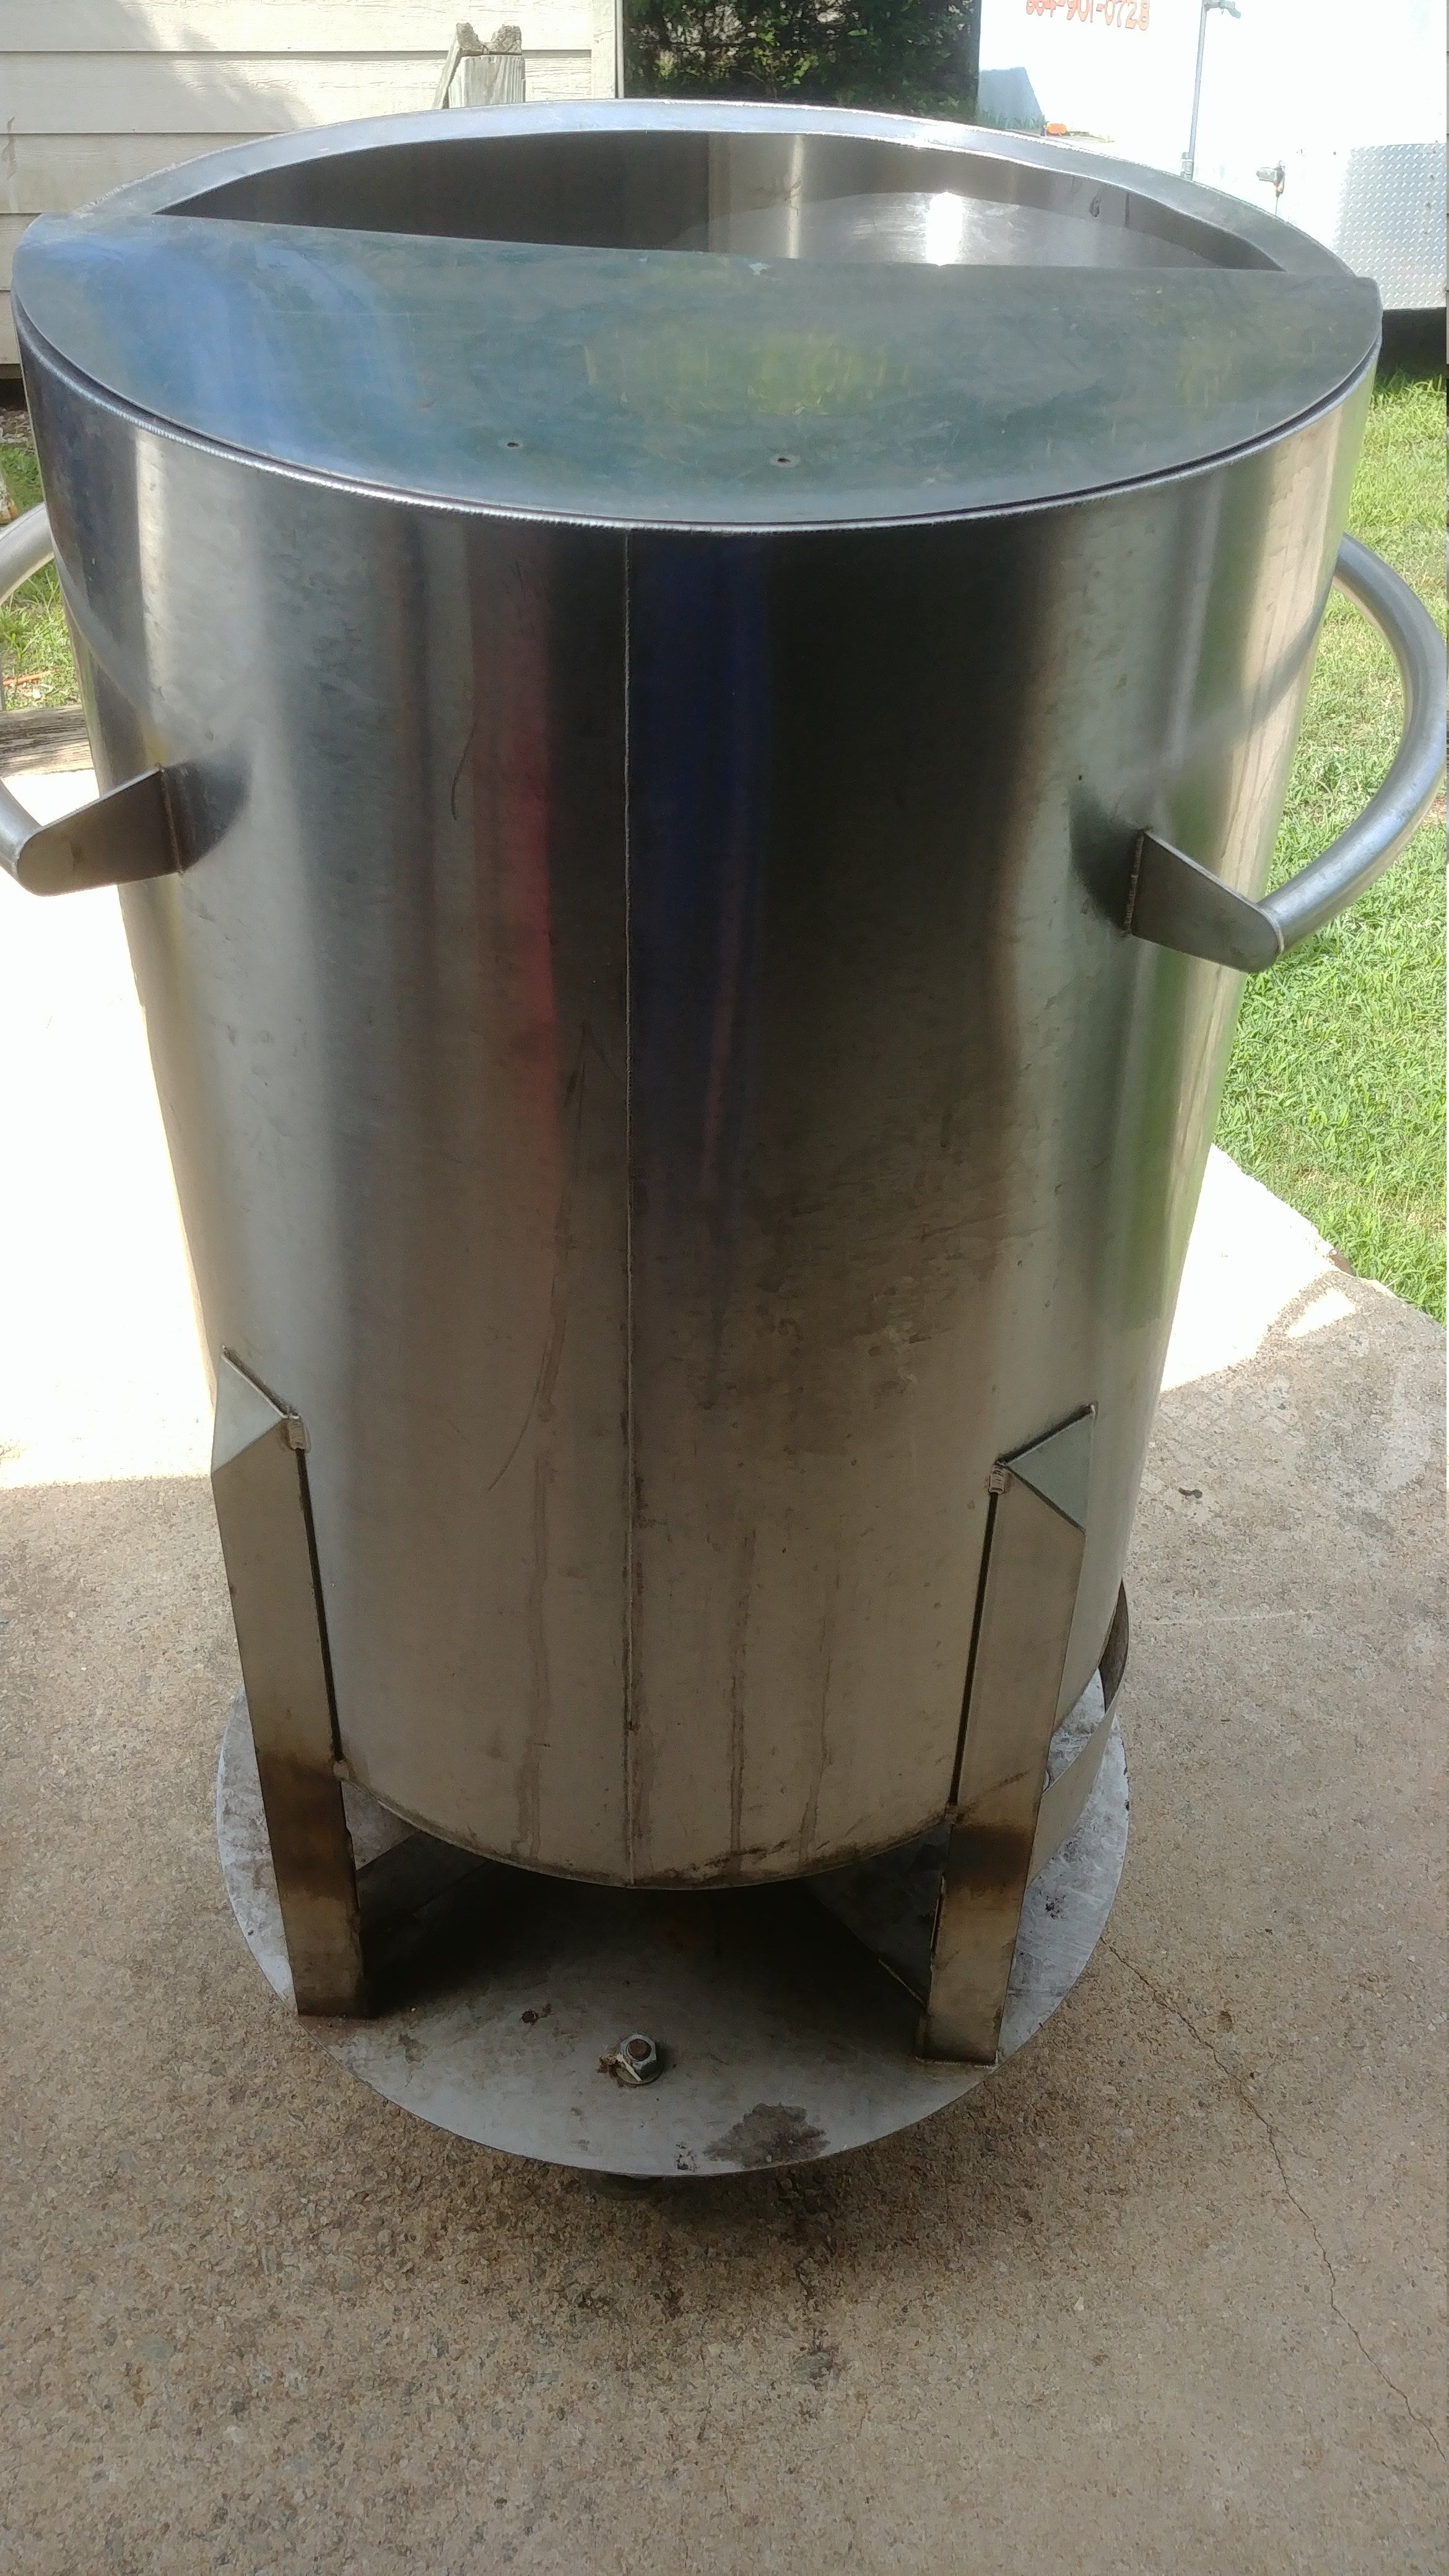 60 Gallon 32" High x 23.5" Wide Boiled Peanut 16 Gauge Stainless Steel Barrel Drum Container Kettle Tank Beer Brewing with Drain